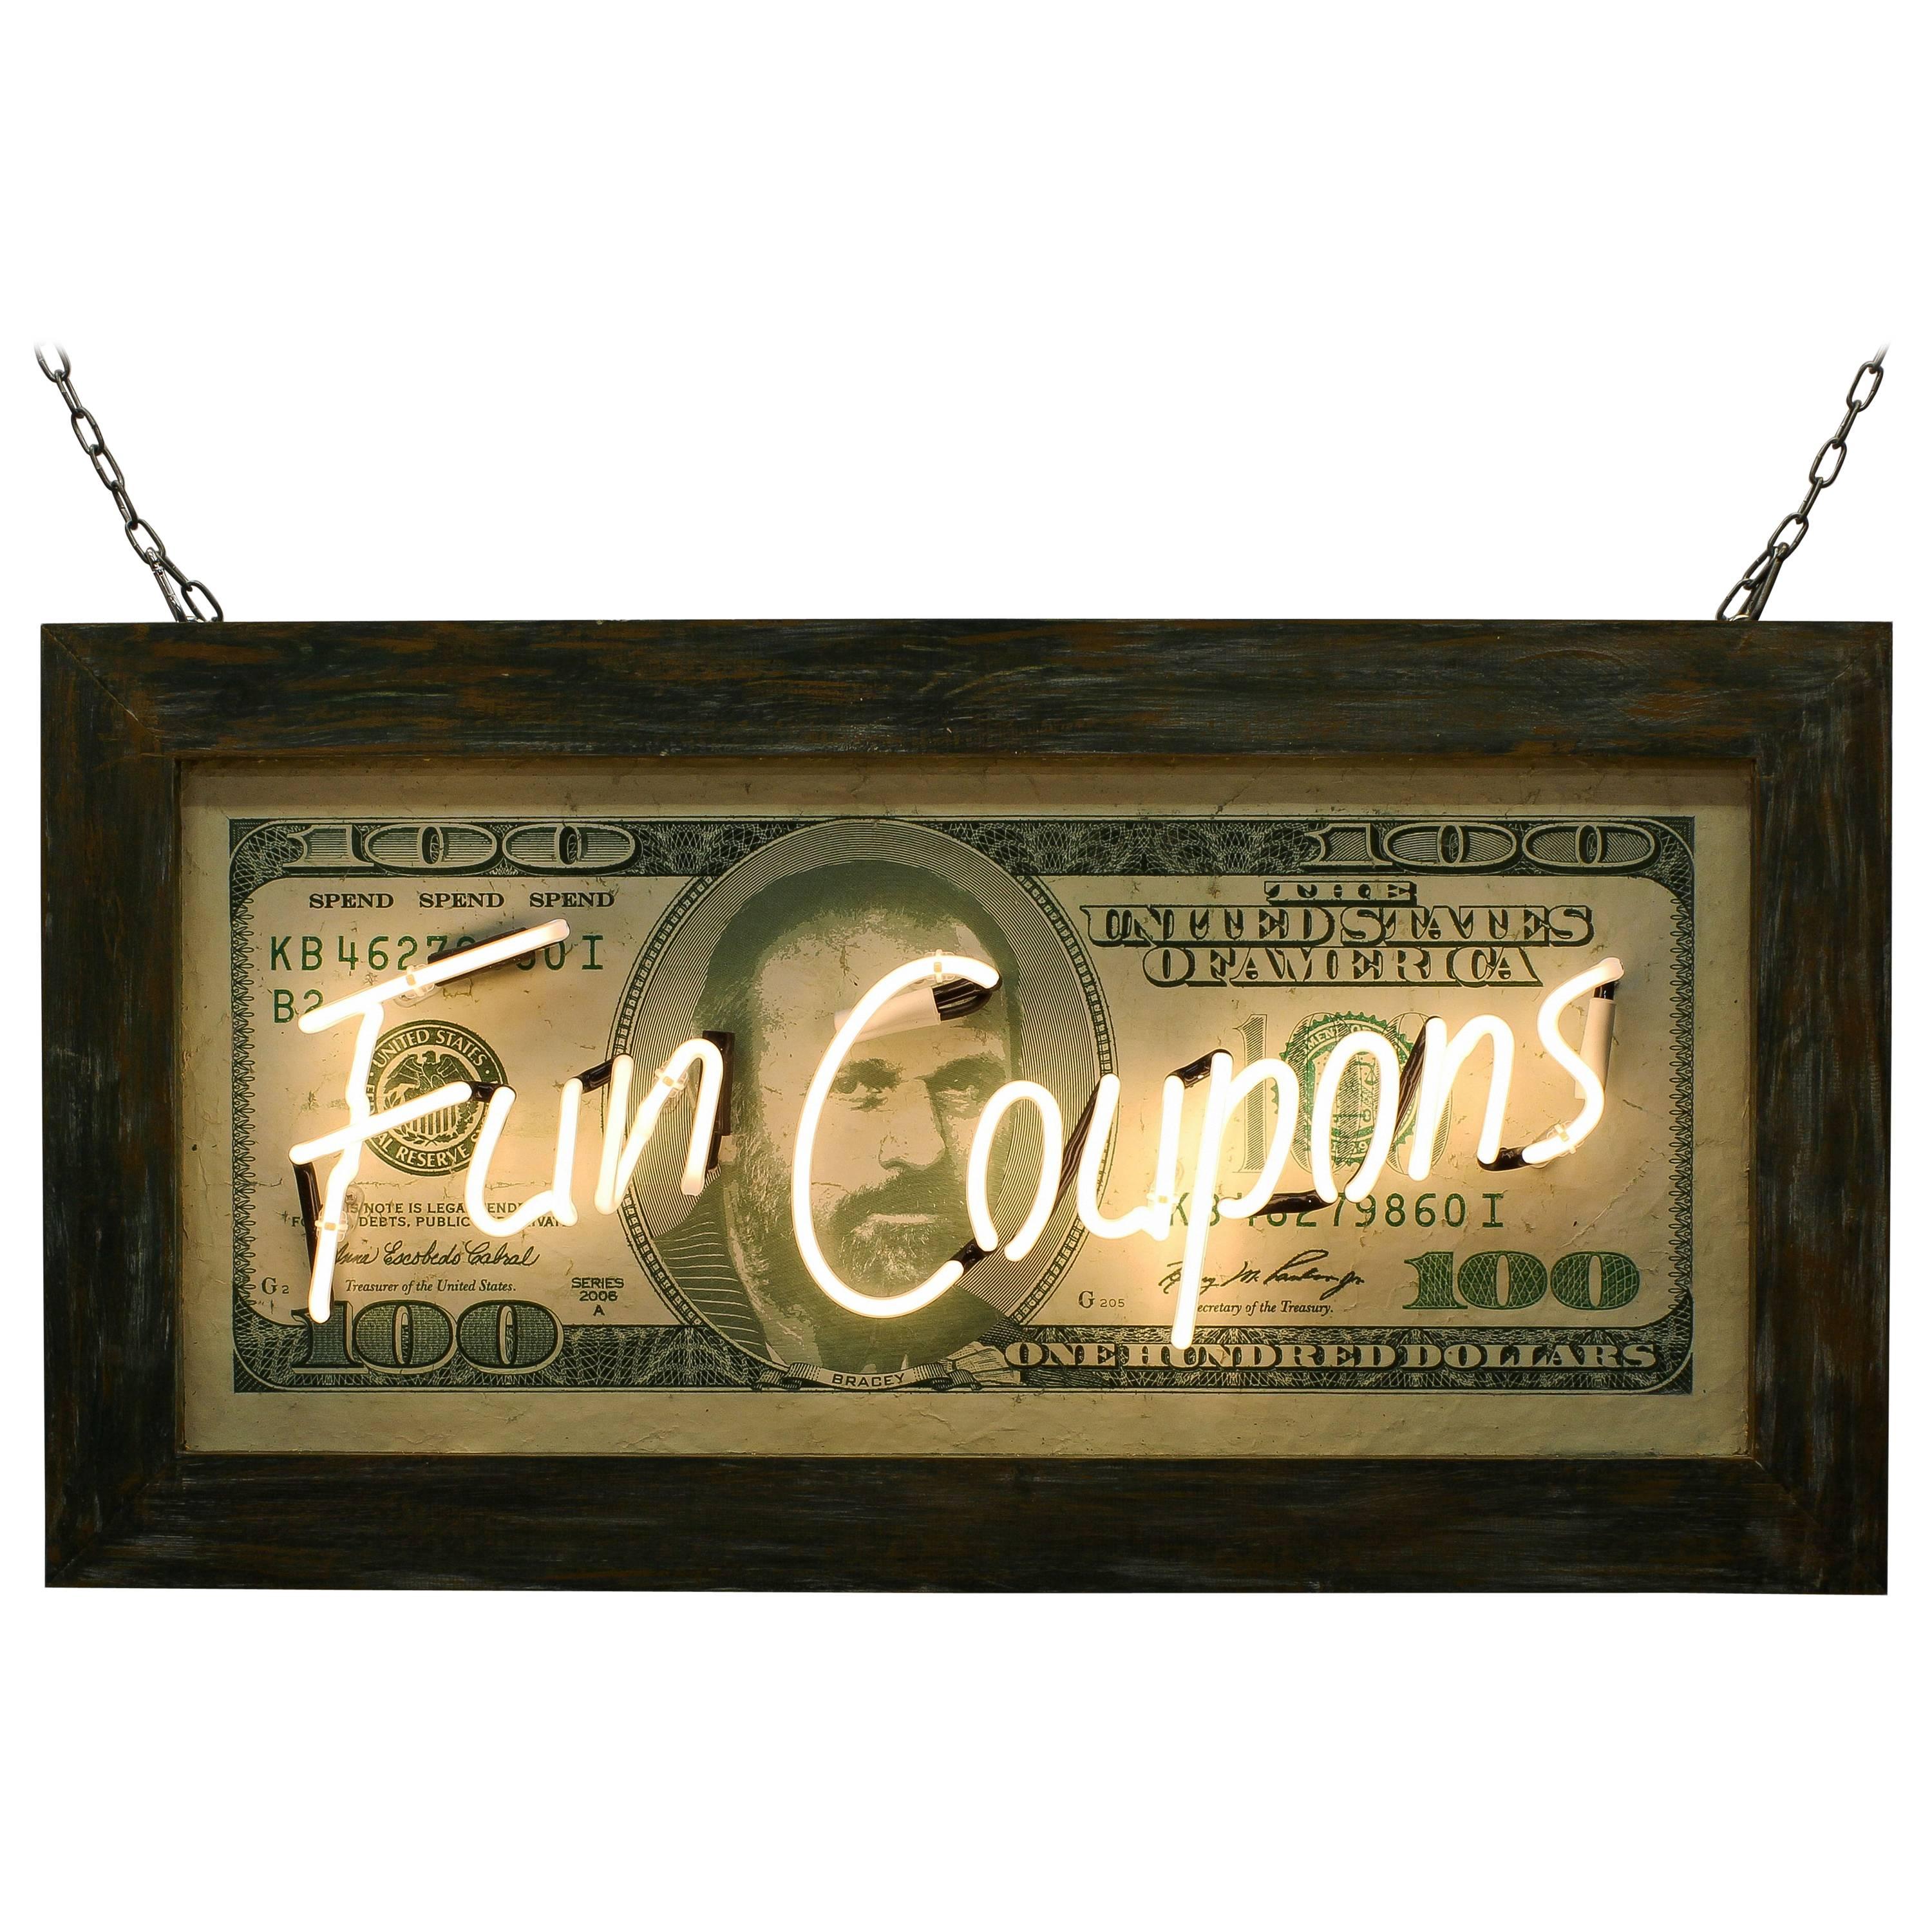 Charley Bracey, "Fun Coupons" Neon Artwork For Sale